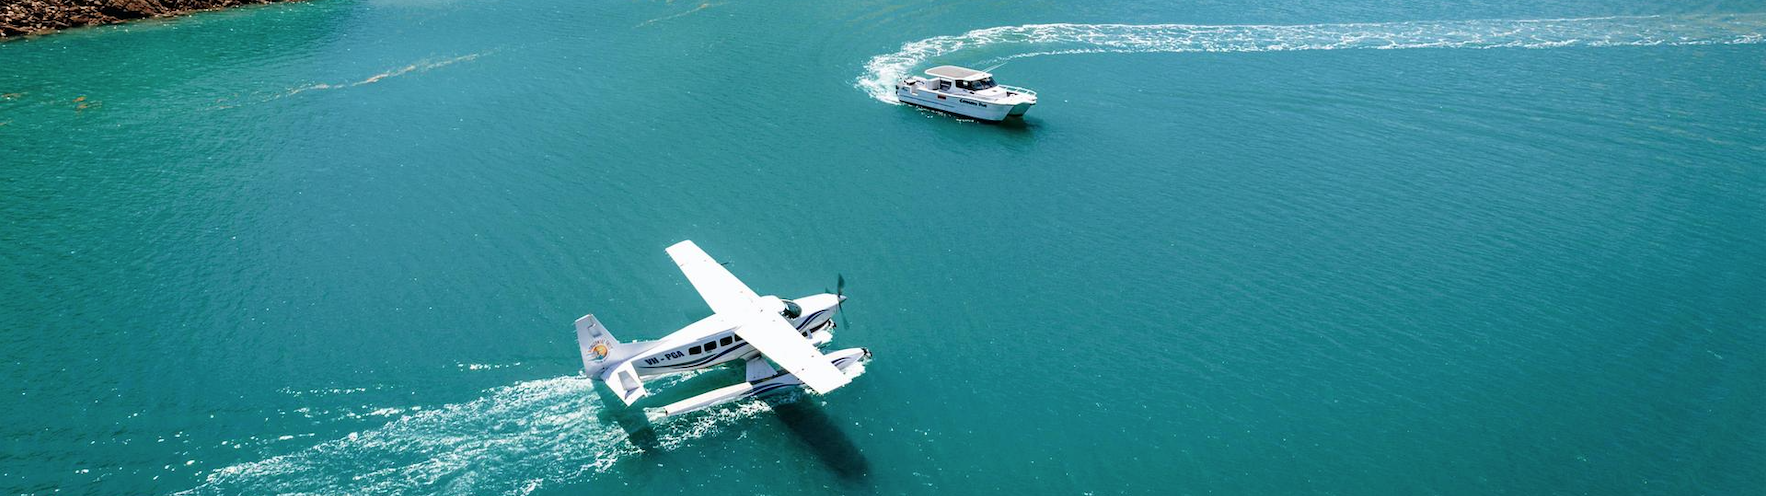 Derby Australia a flyplane and boat in the water